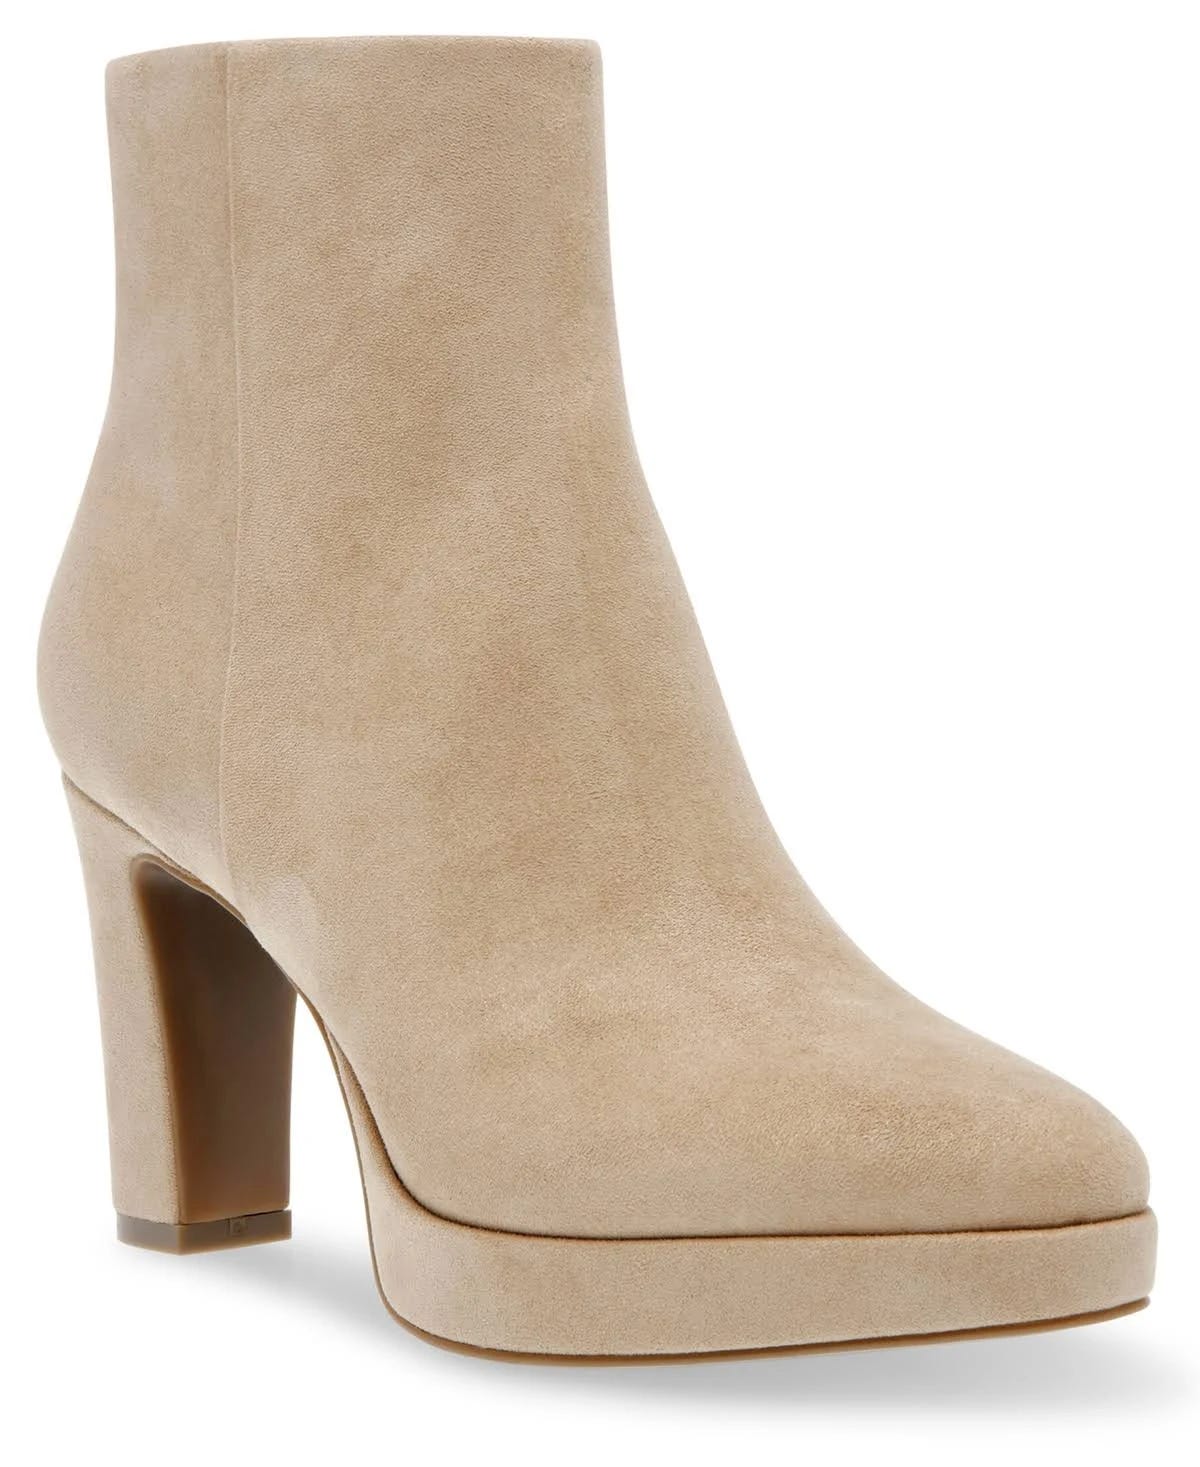 Comfy Camel-Colored Anne Klein Bootie | Image